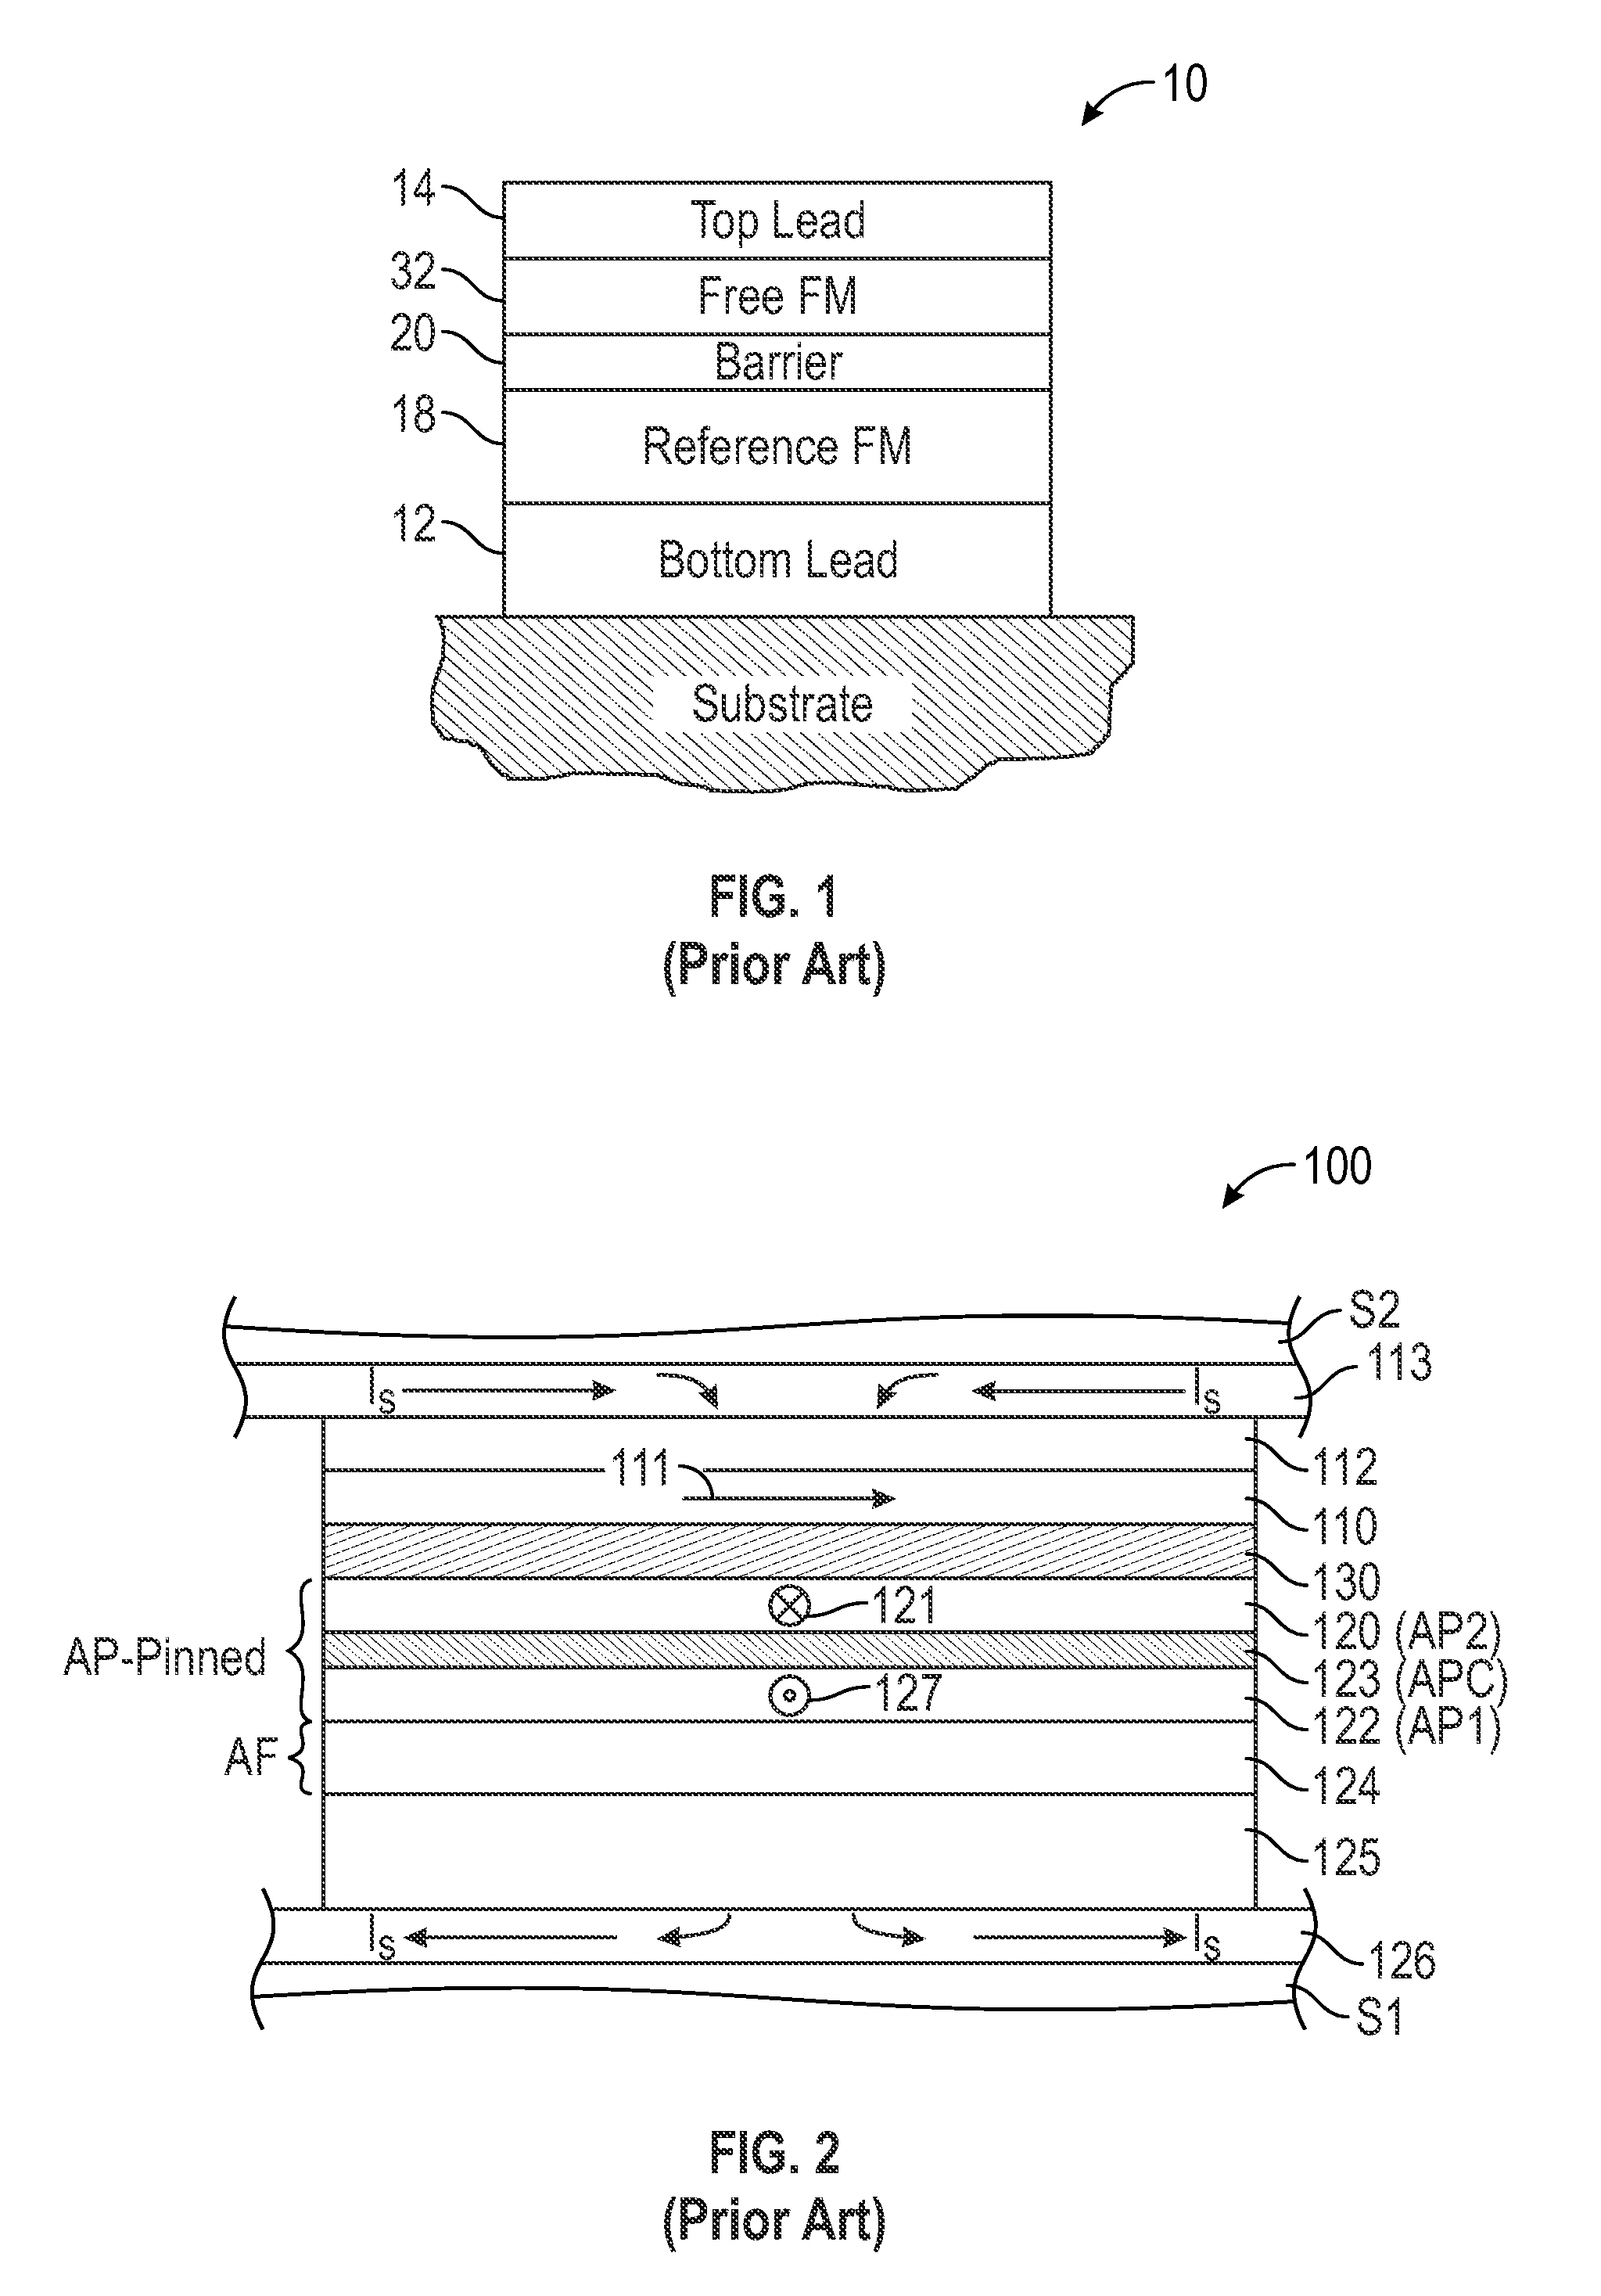 Tunneling magnetoresistive (TMR) device with MgO tunneling barrier layer and nitrogen-containing layer for minimization of boron diffusion